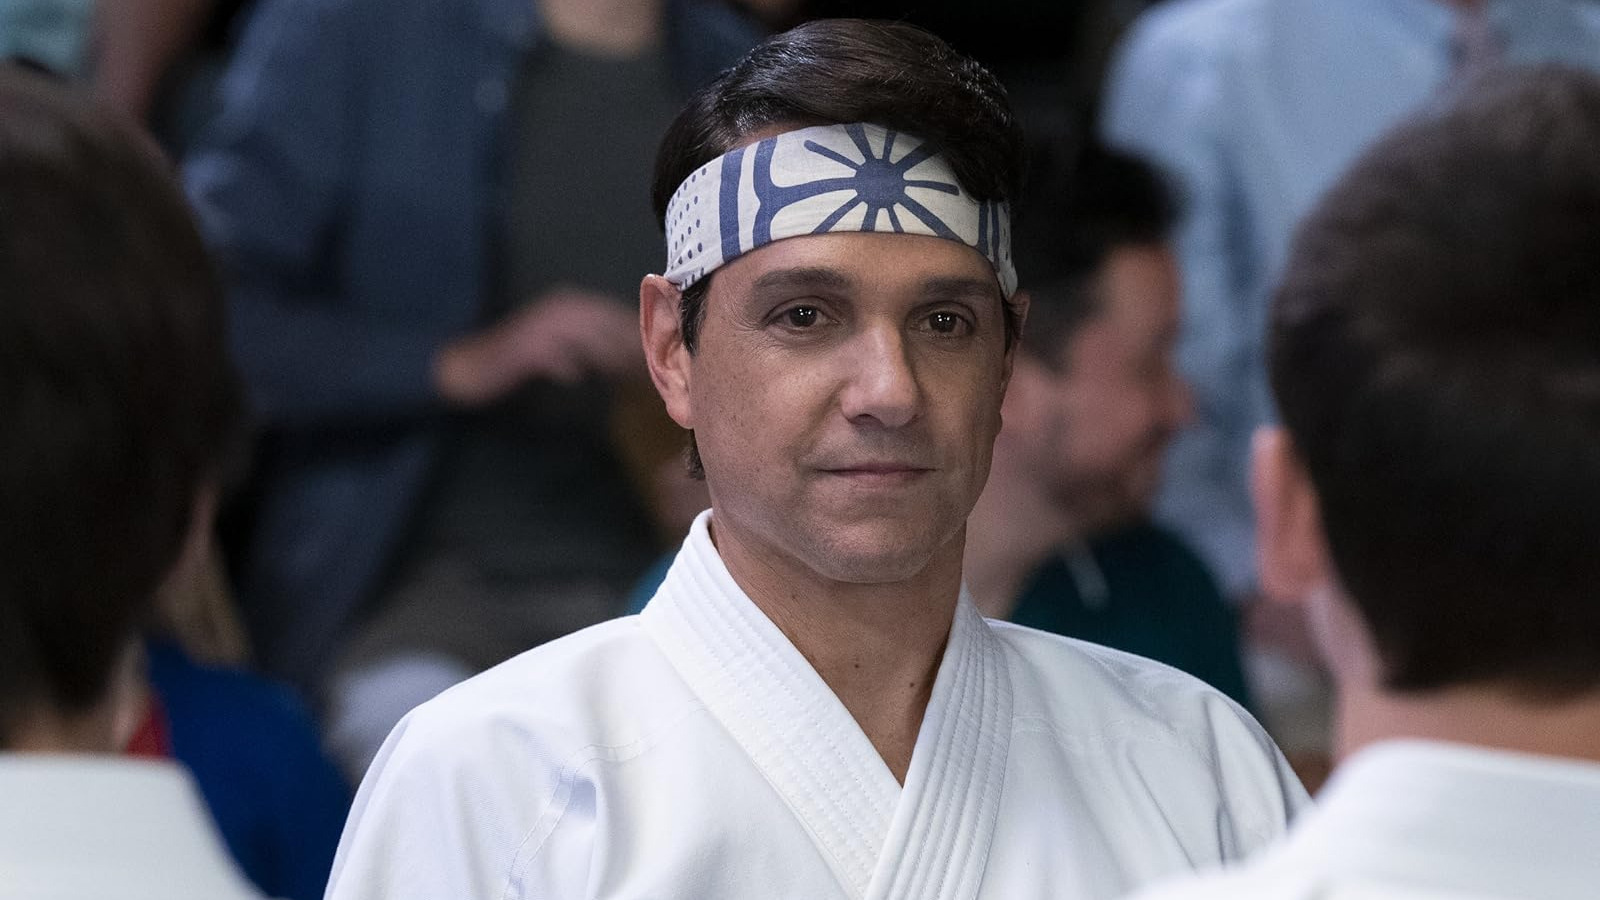 Cobra Kai' Cast - List of Characters In Karate Kid Spin-Off